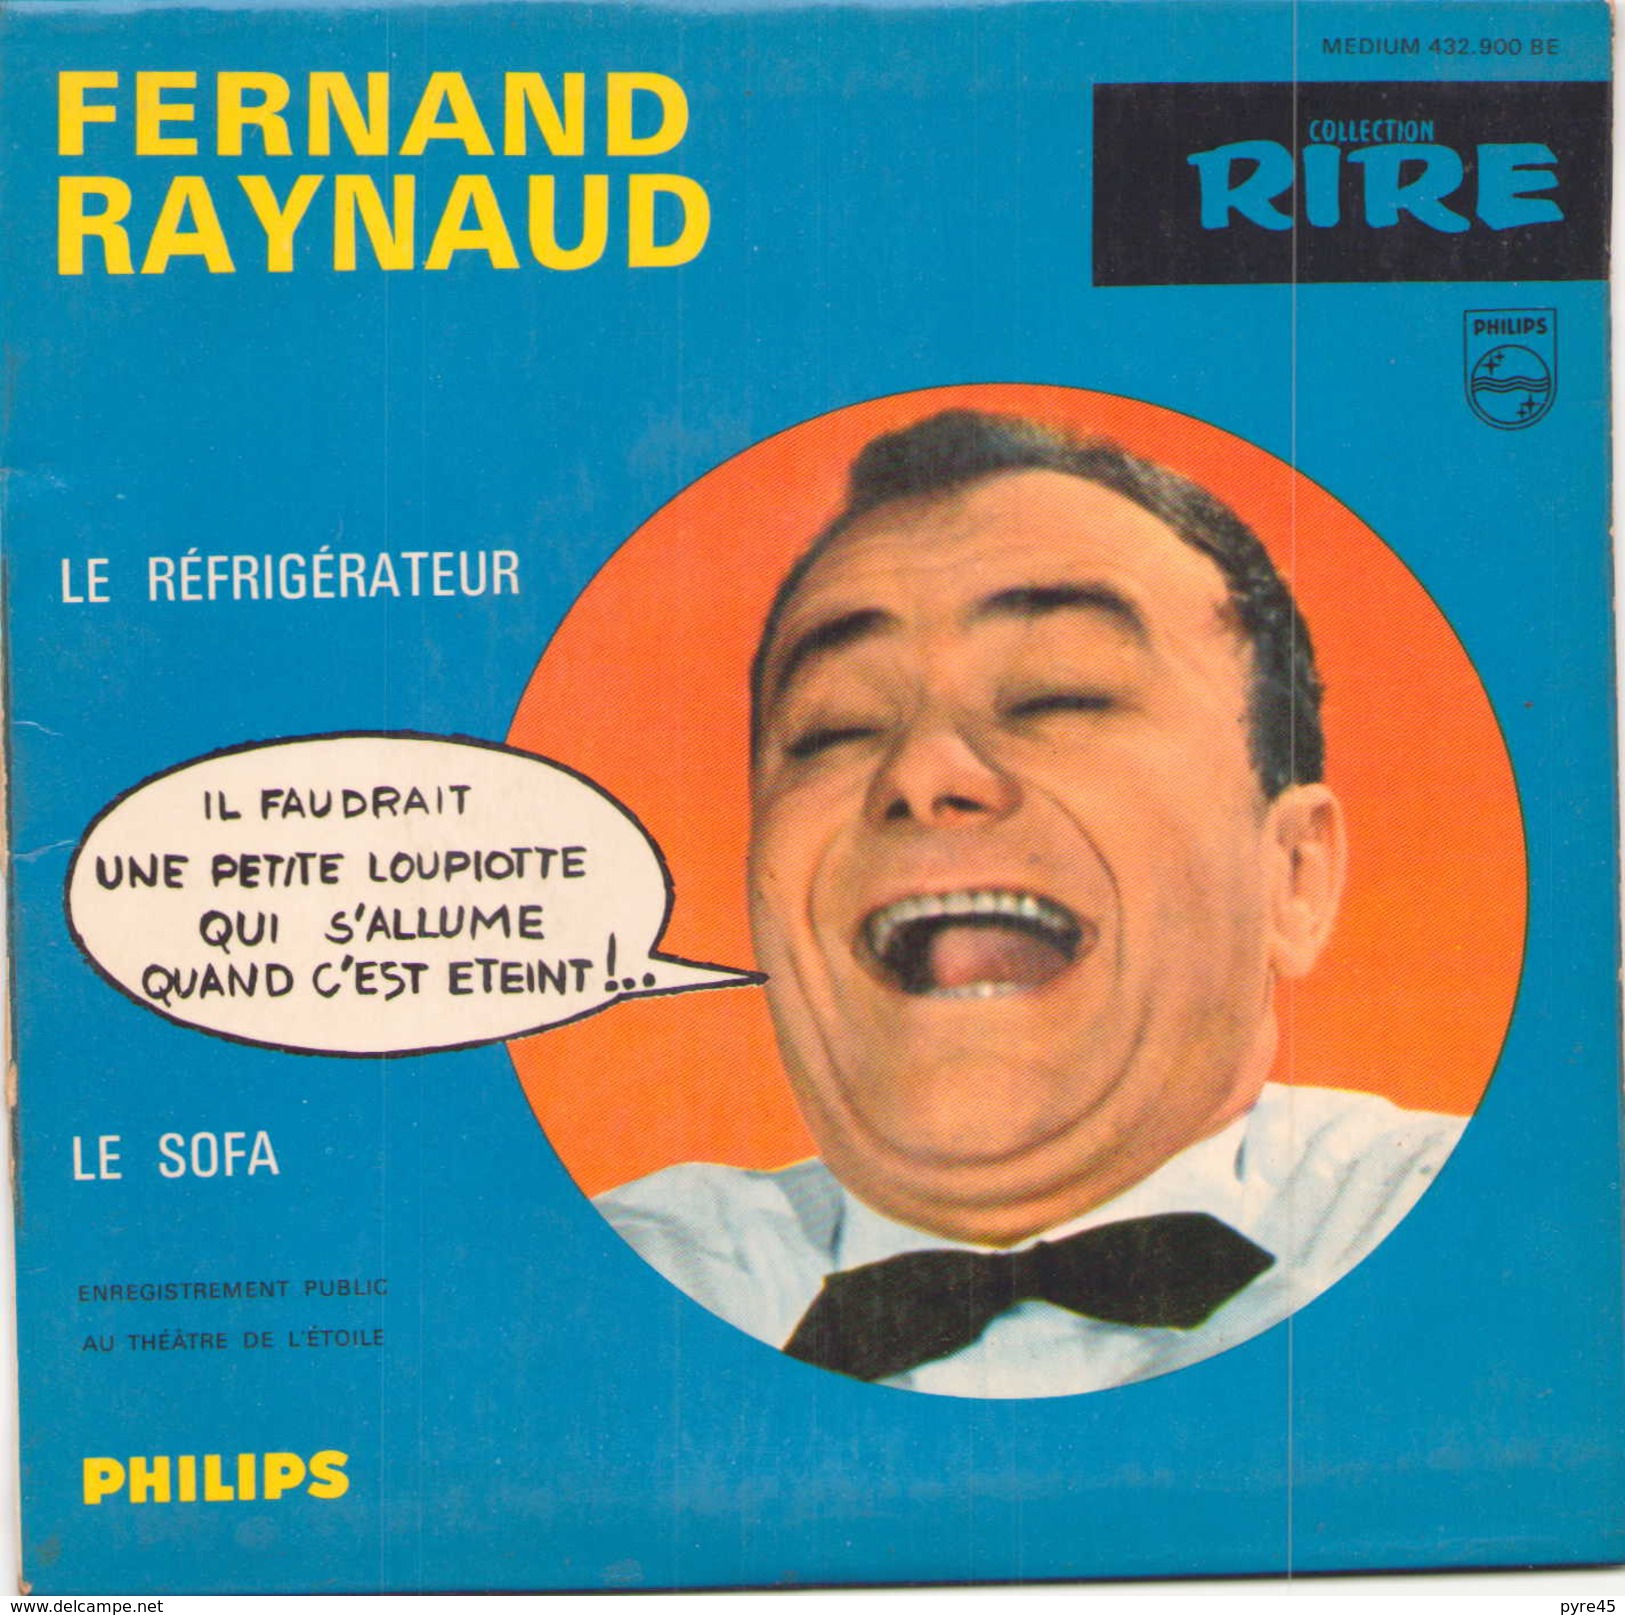 45 TOURS EP FERNAND RAYNAUD LE REFRIGERATEUR / LE SOFA PHILIPS 432900 - Humor, Cabaret